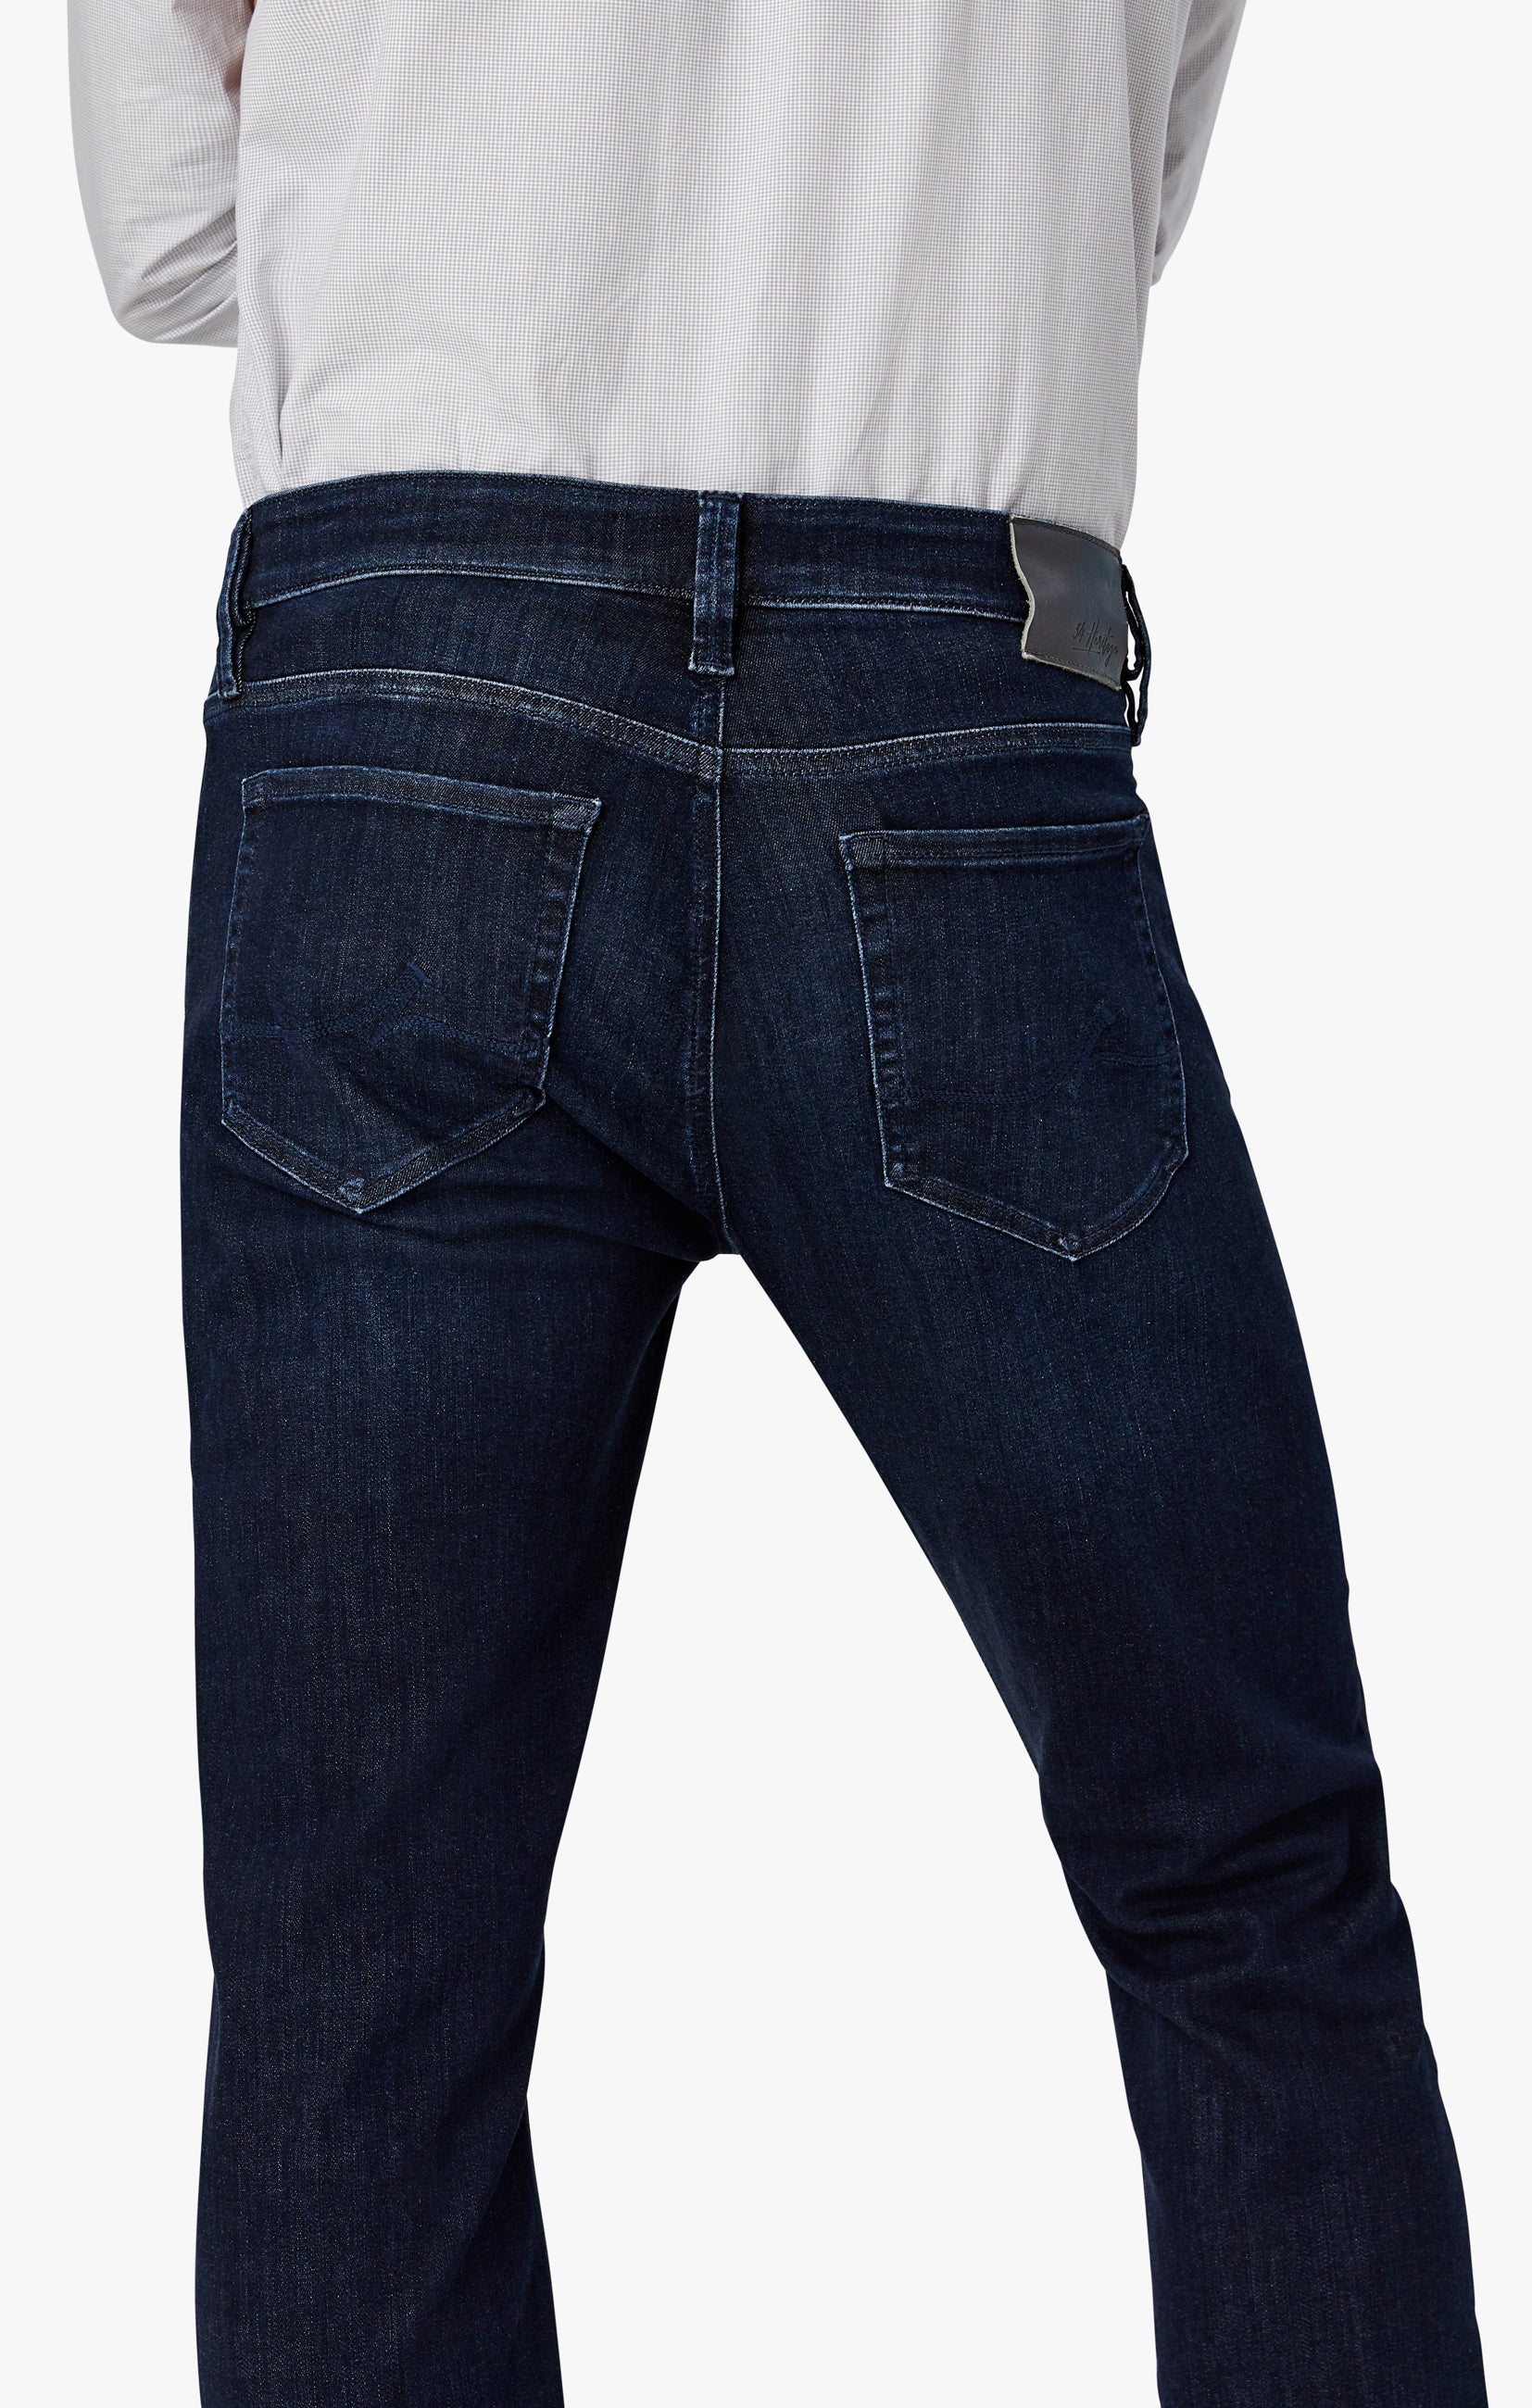 Courage Straight Leg Jeans in Deep Urban Image 6